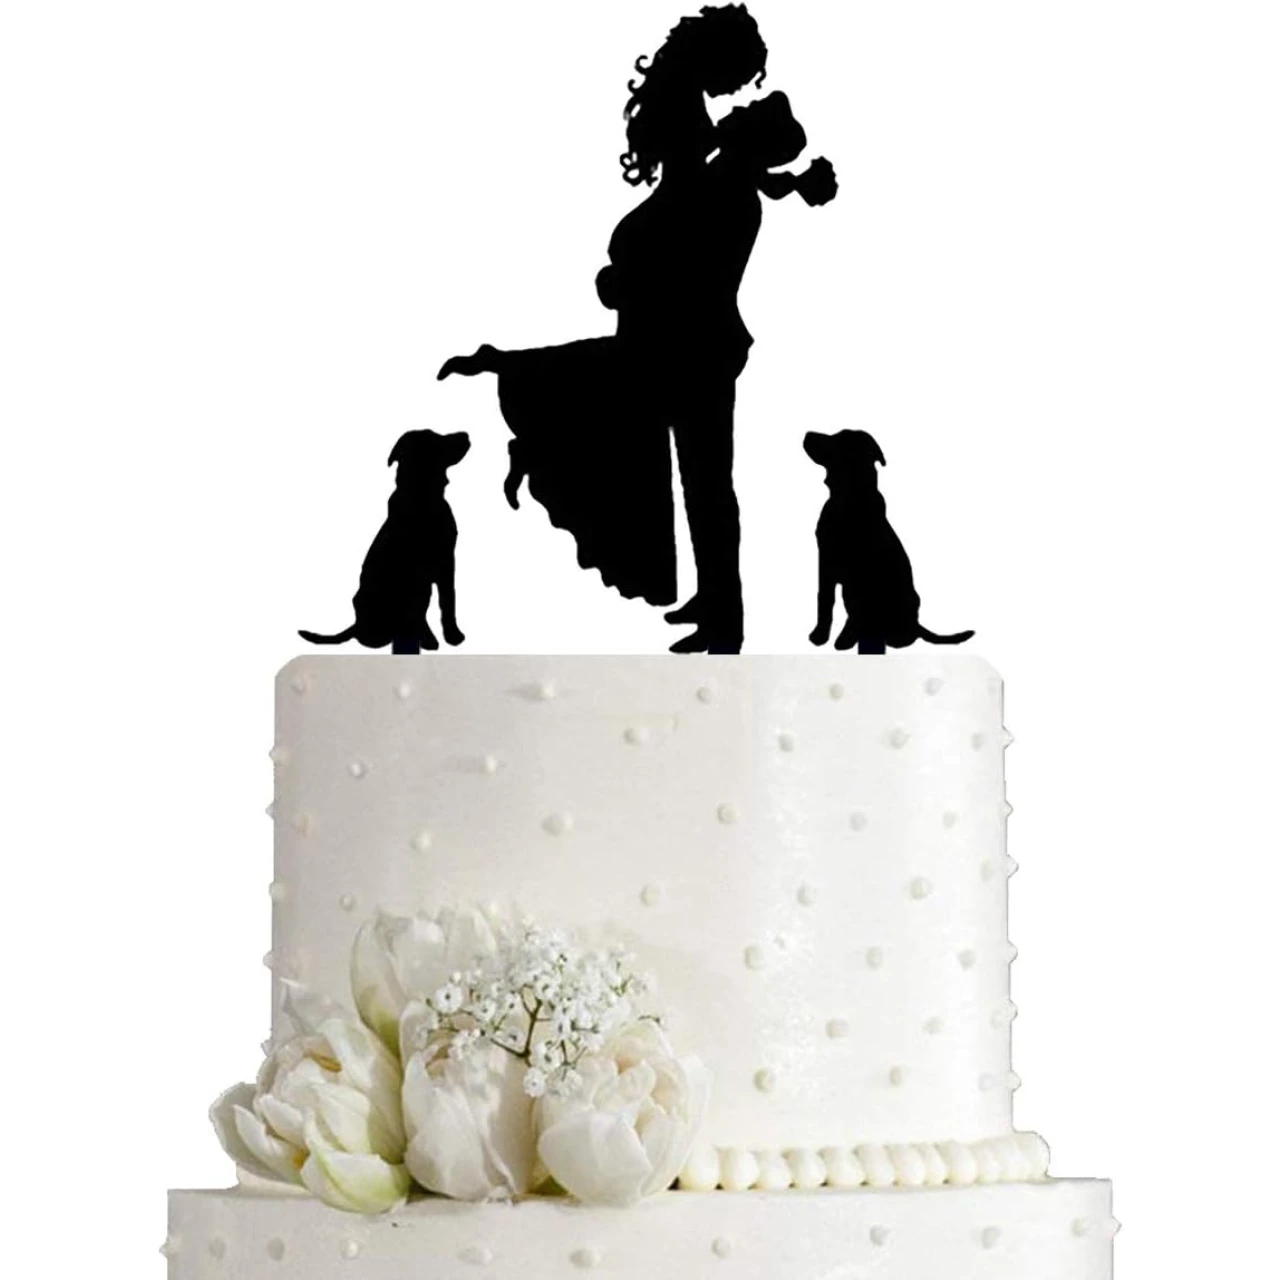 Wedding Cake Topper - Bride Hold Groom with Flowers Besides 2 Pet Dogs Silhouette Cake Decoration (Black)